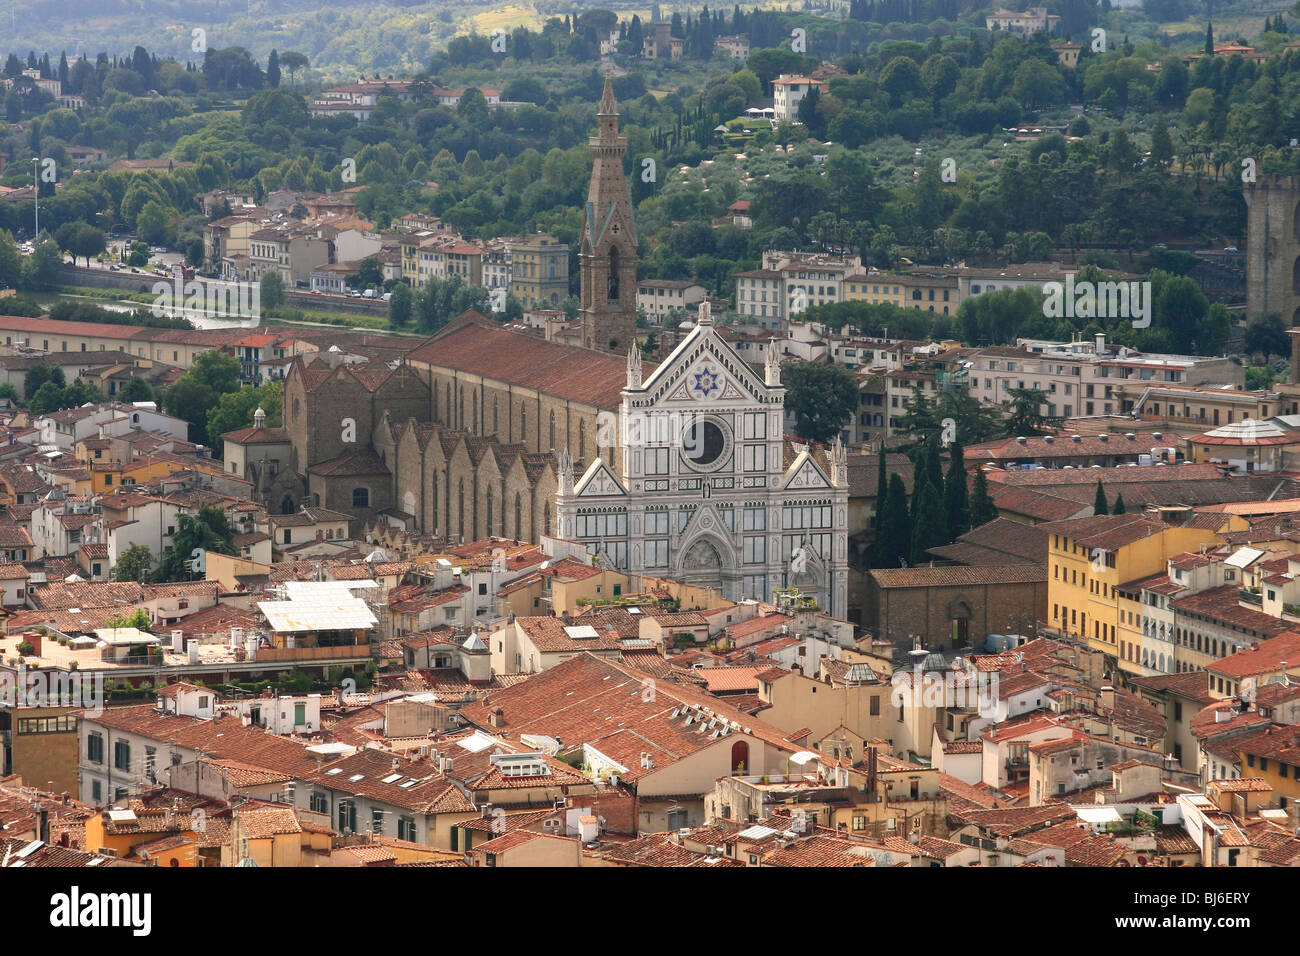 Basilica of Santa Croce in Florence, Italy Stock Photo